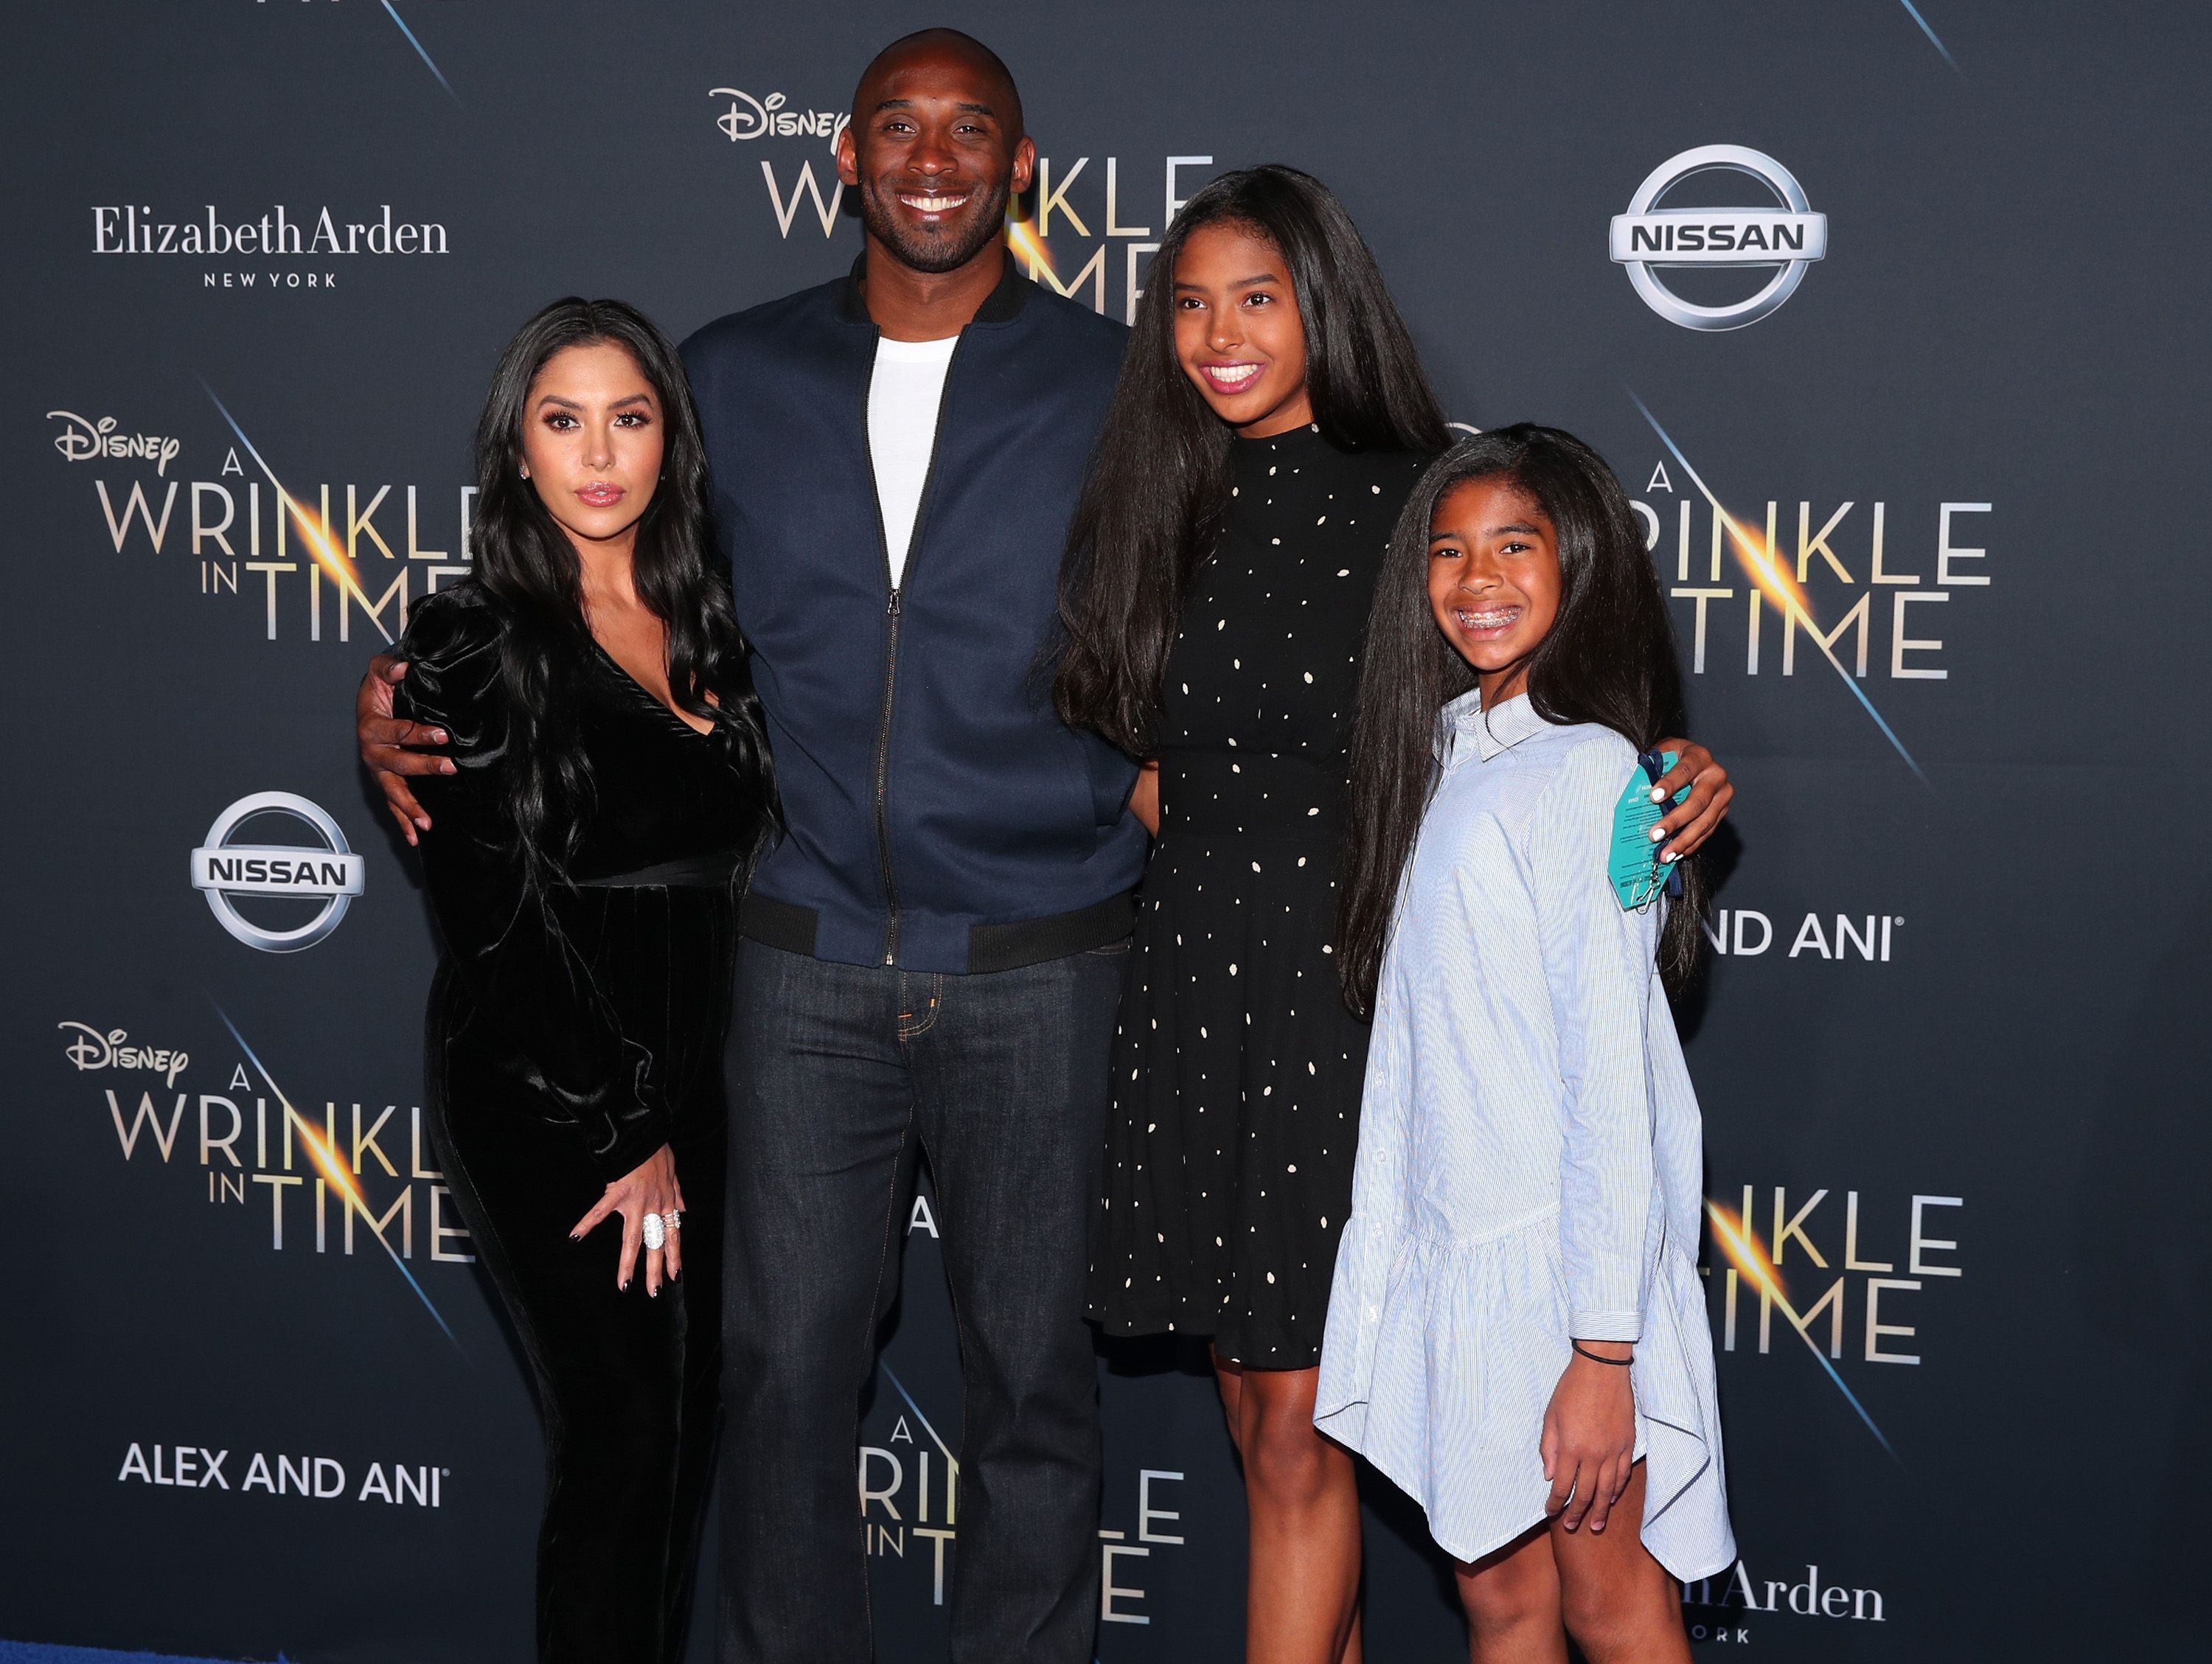 Kobe Bryant and his family at the premiere of Disney's "A Wrinkle In Time" at the El Capitan Theatre on February 26, 2018 | Photo: Getty Images